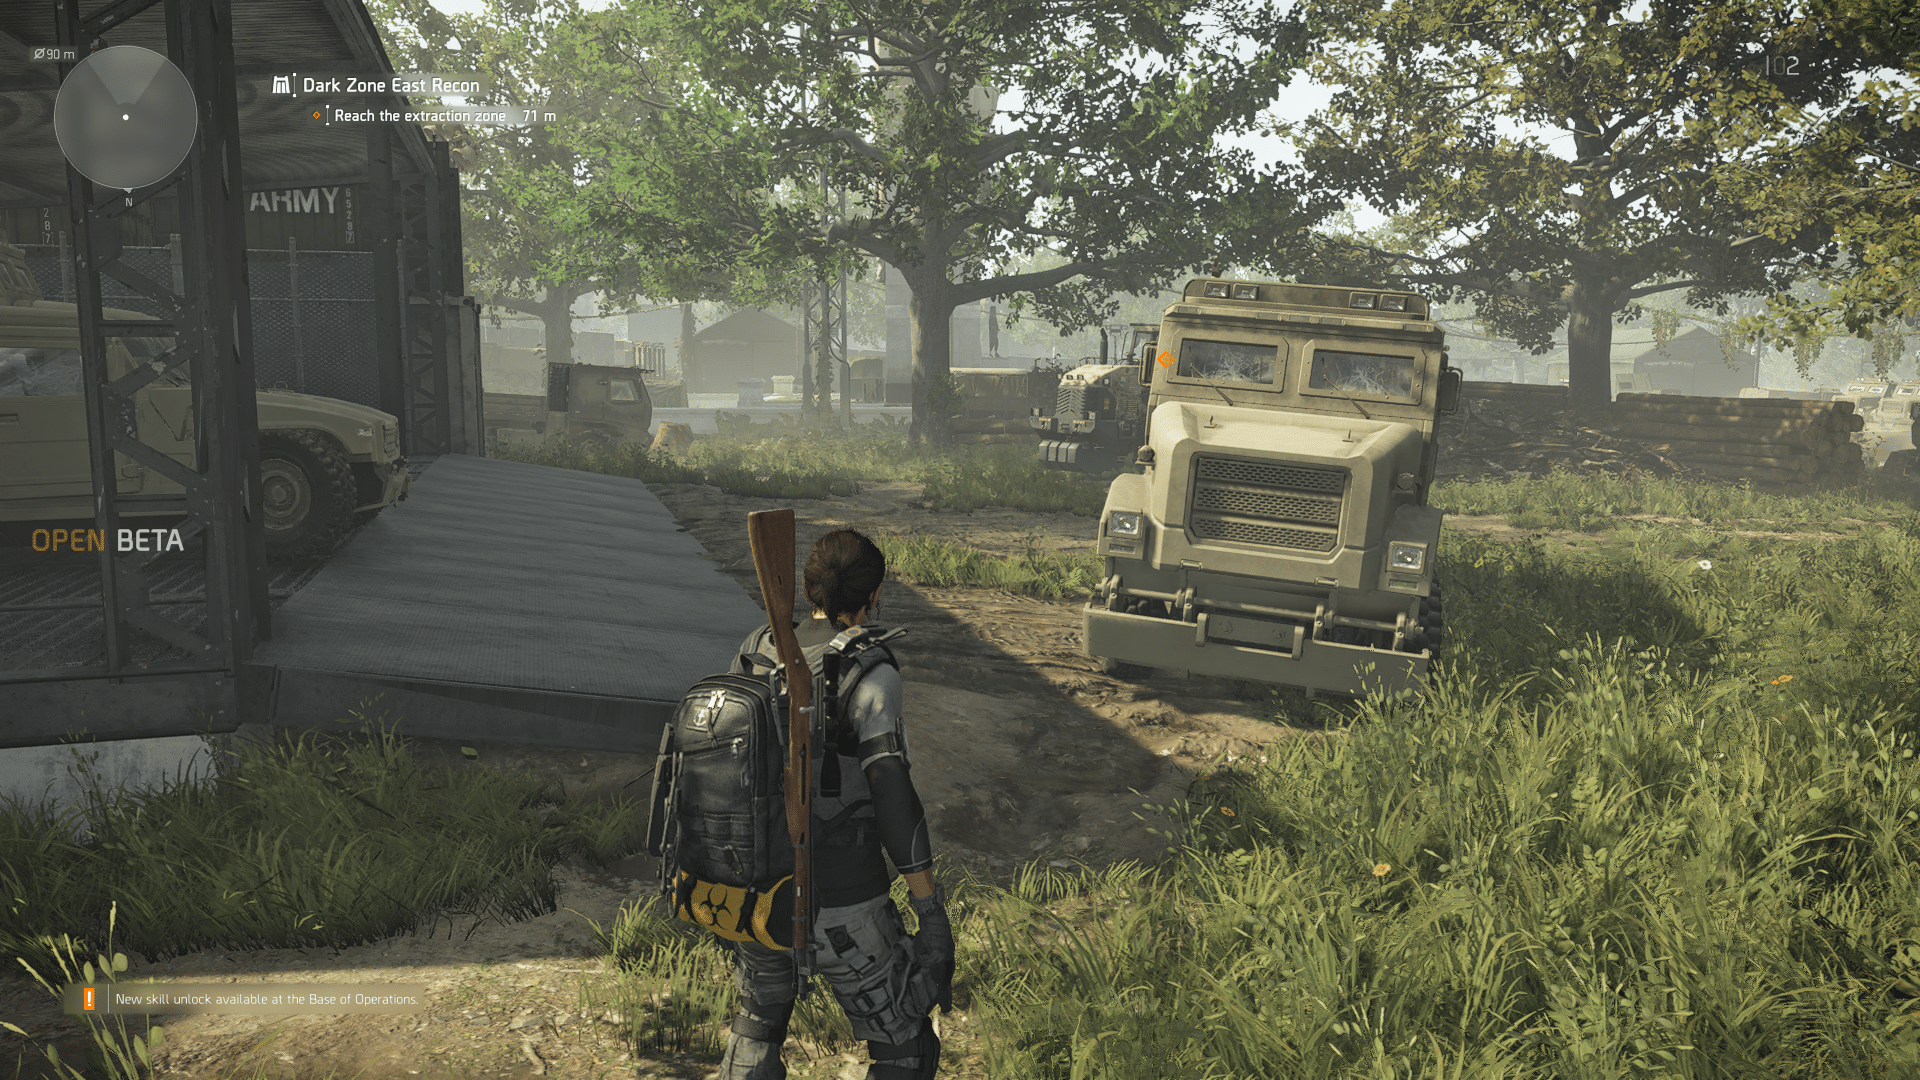 TheDivision2 3 4 2019 8 56 21 PM 932